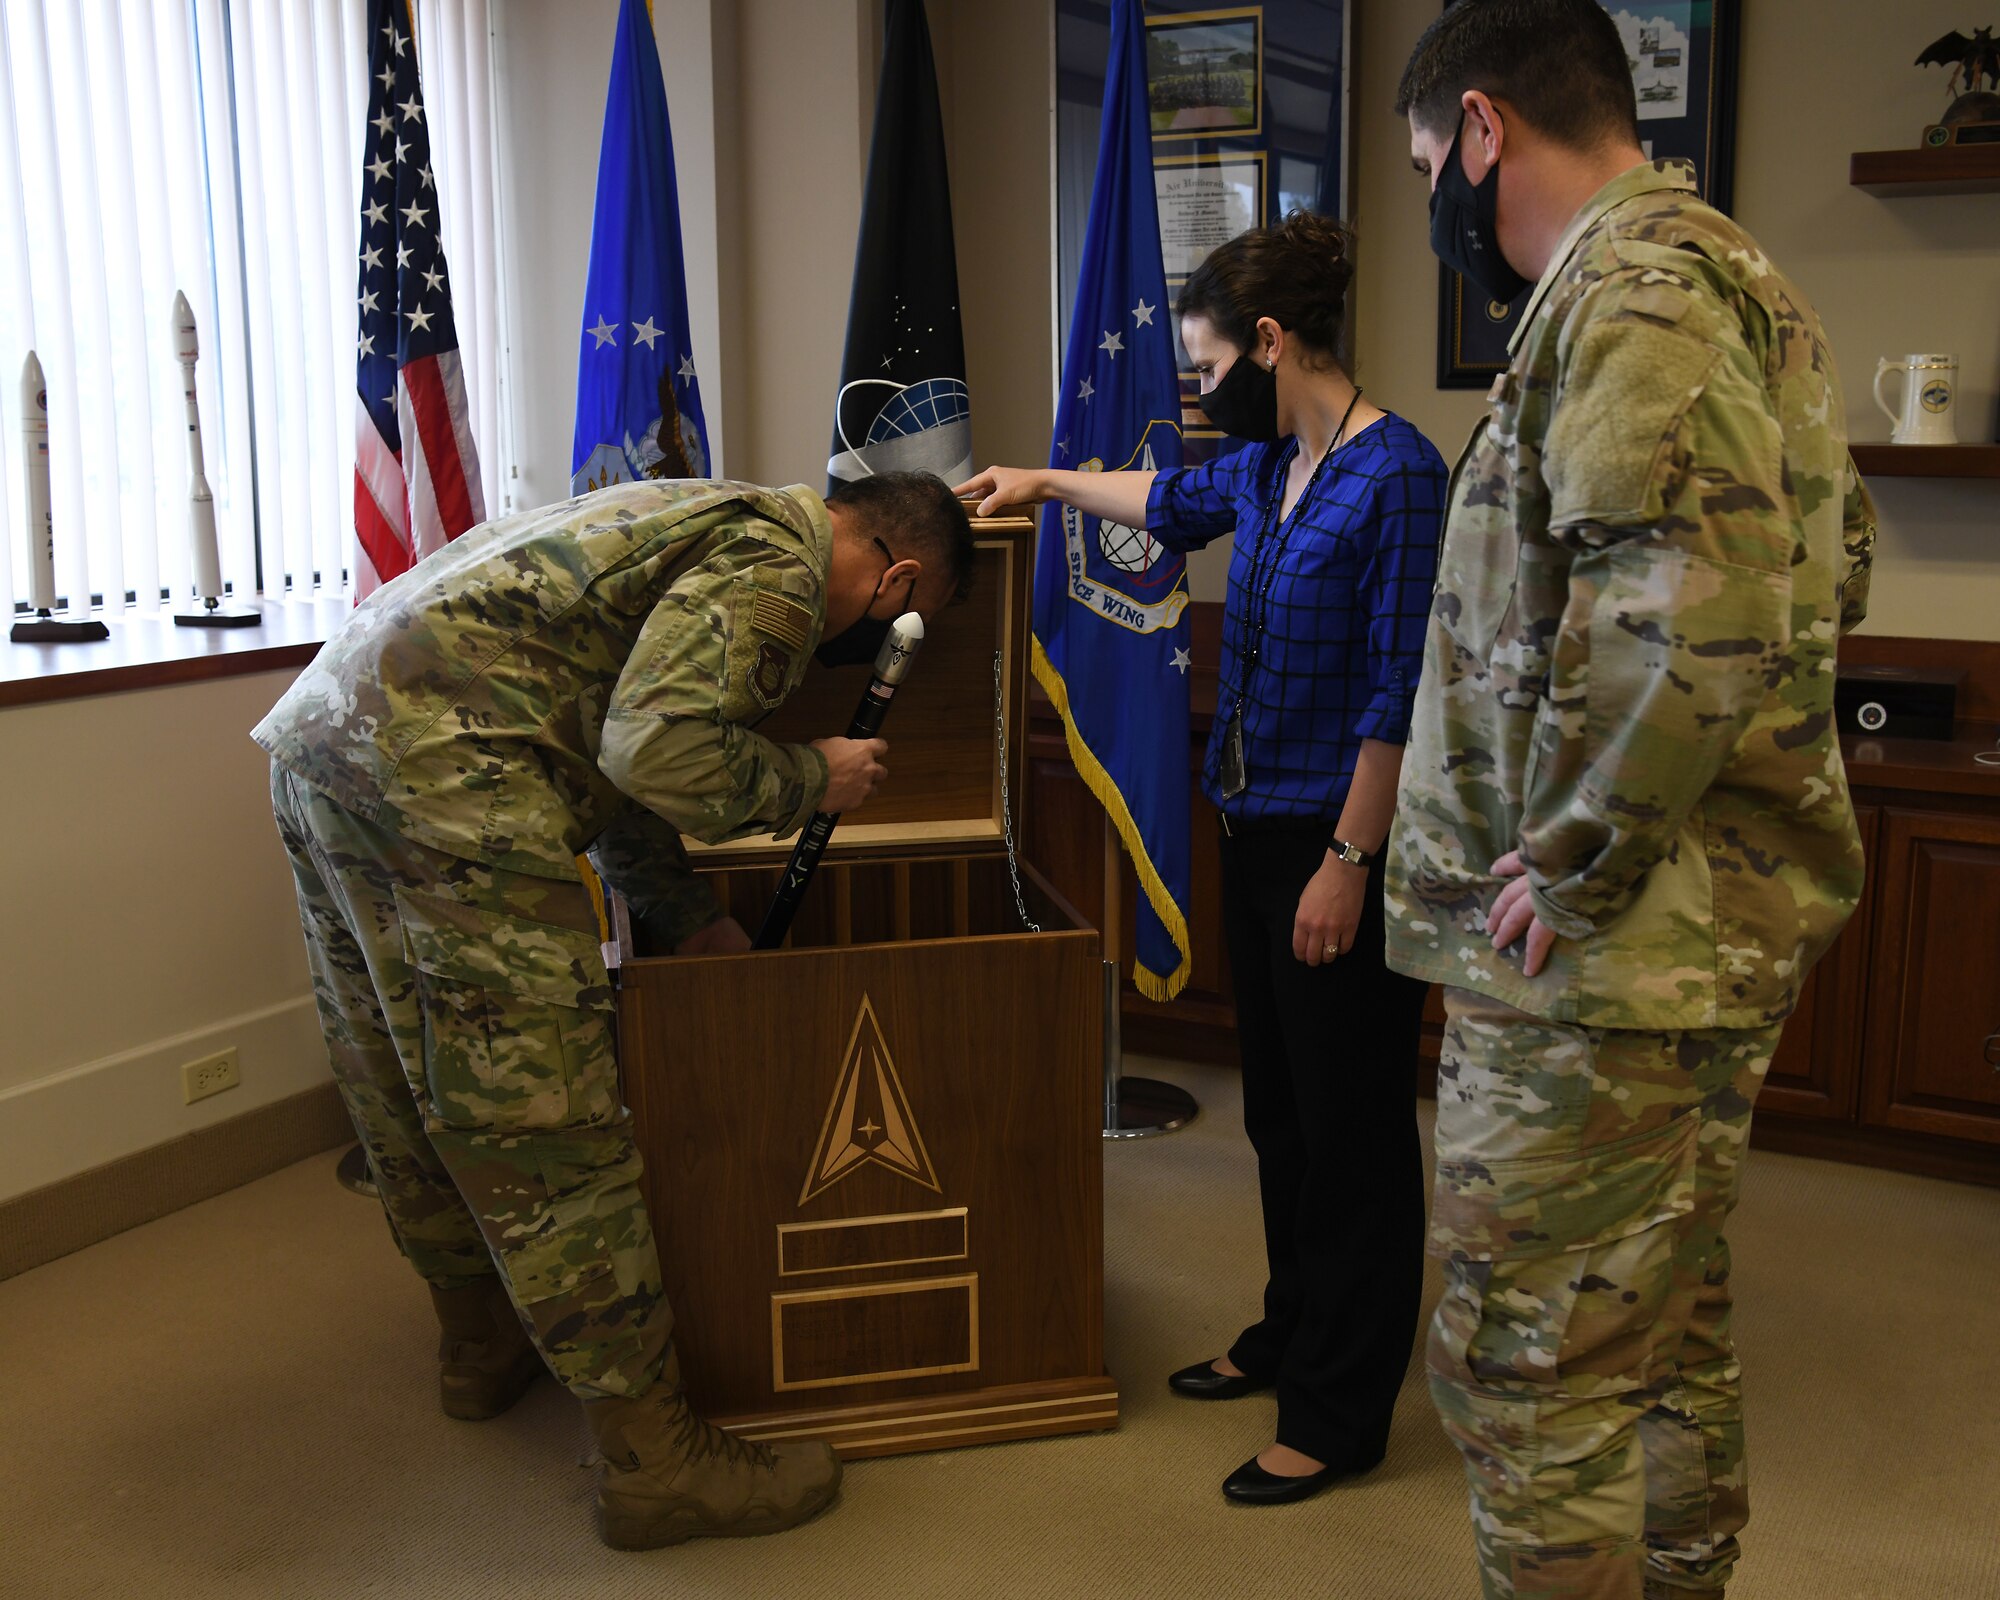 Col. Anthony Mastalir, 30th Space Wing commander, places the final item into the 30th Space Wing 2020 time capsule Dec. 17, 2020, at Vandenberg Air Force Base, Calif.